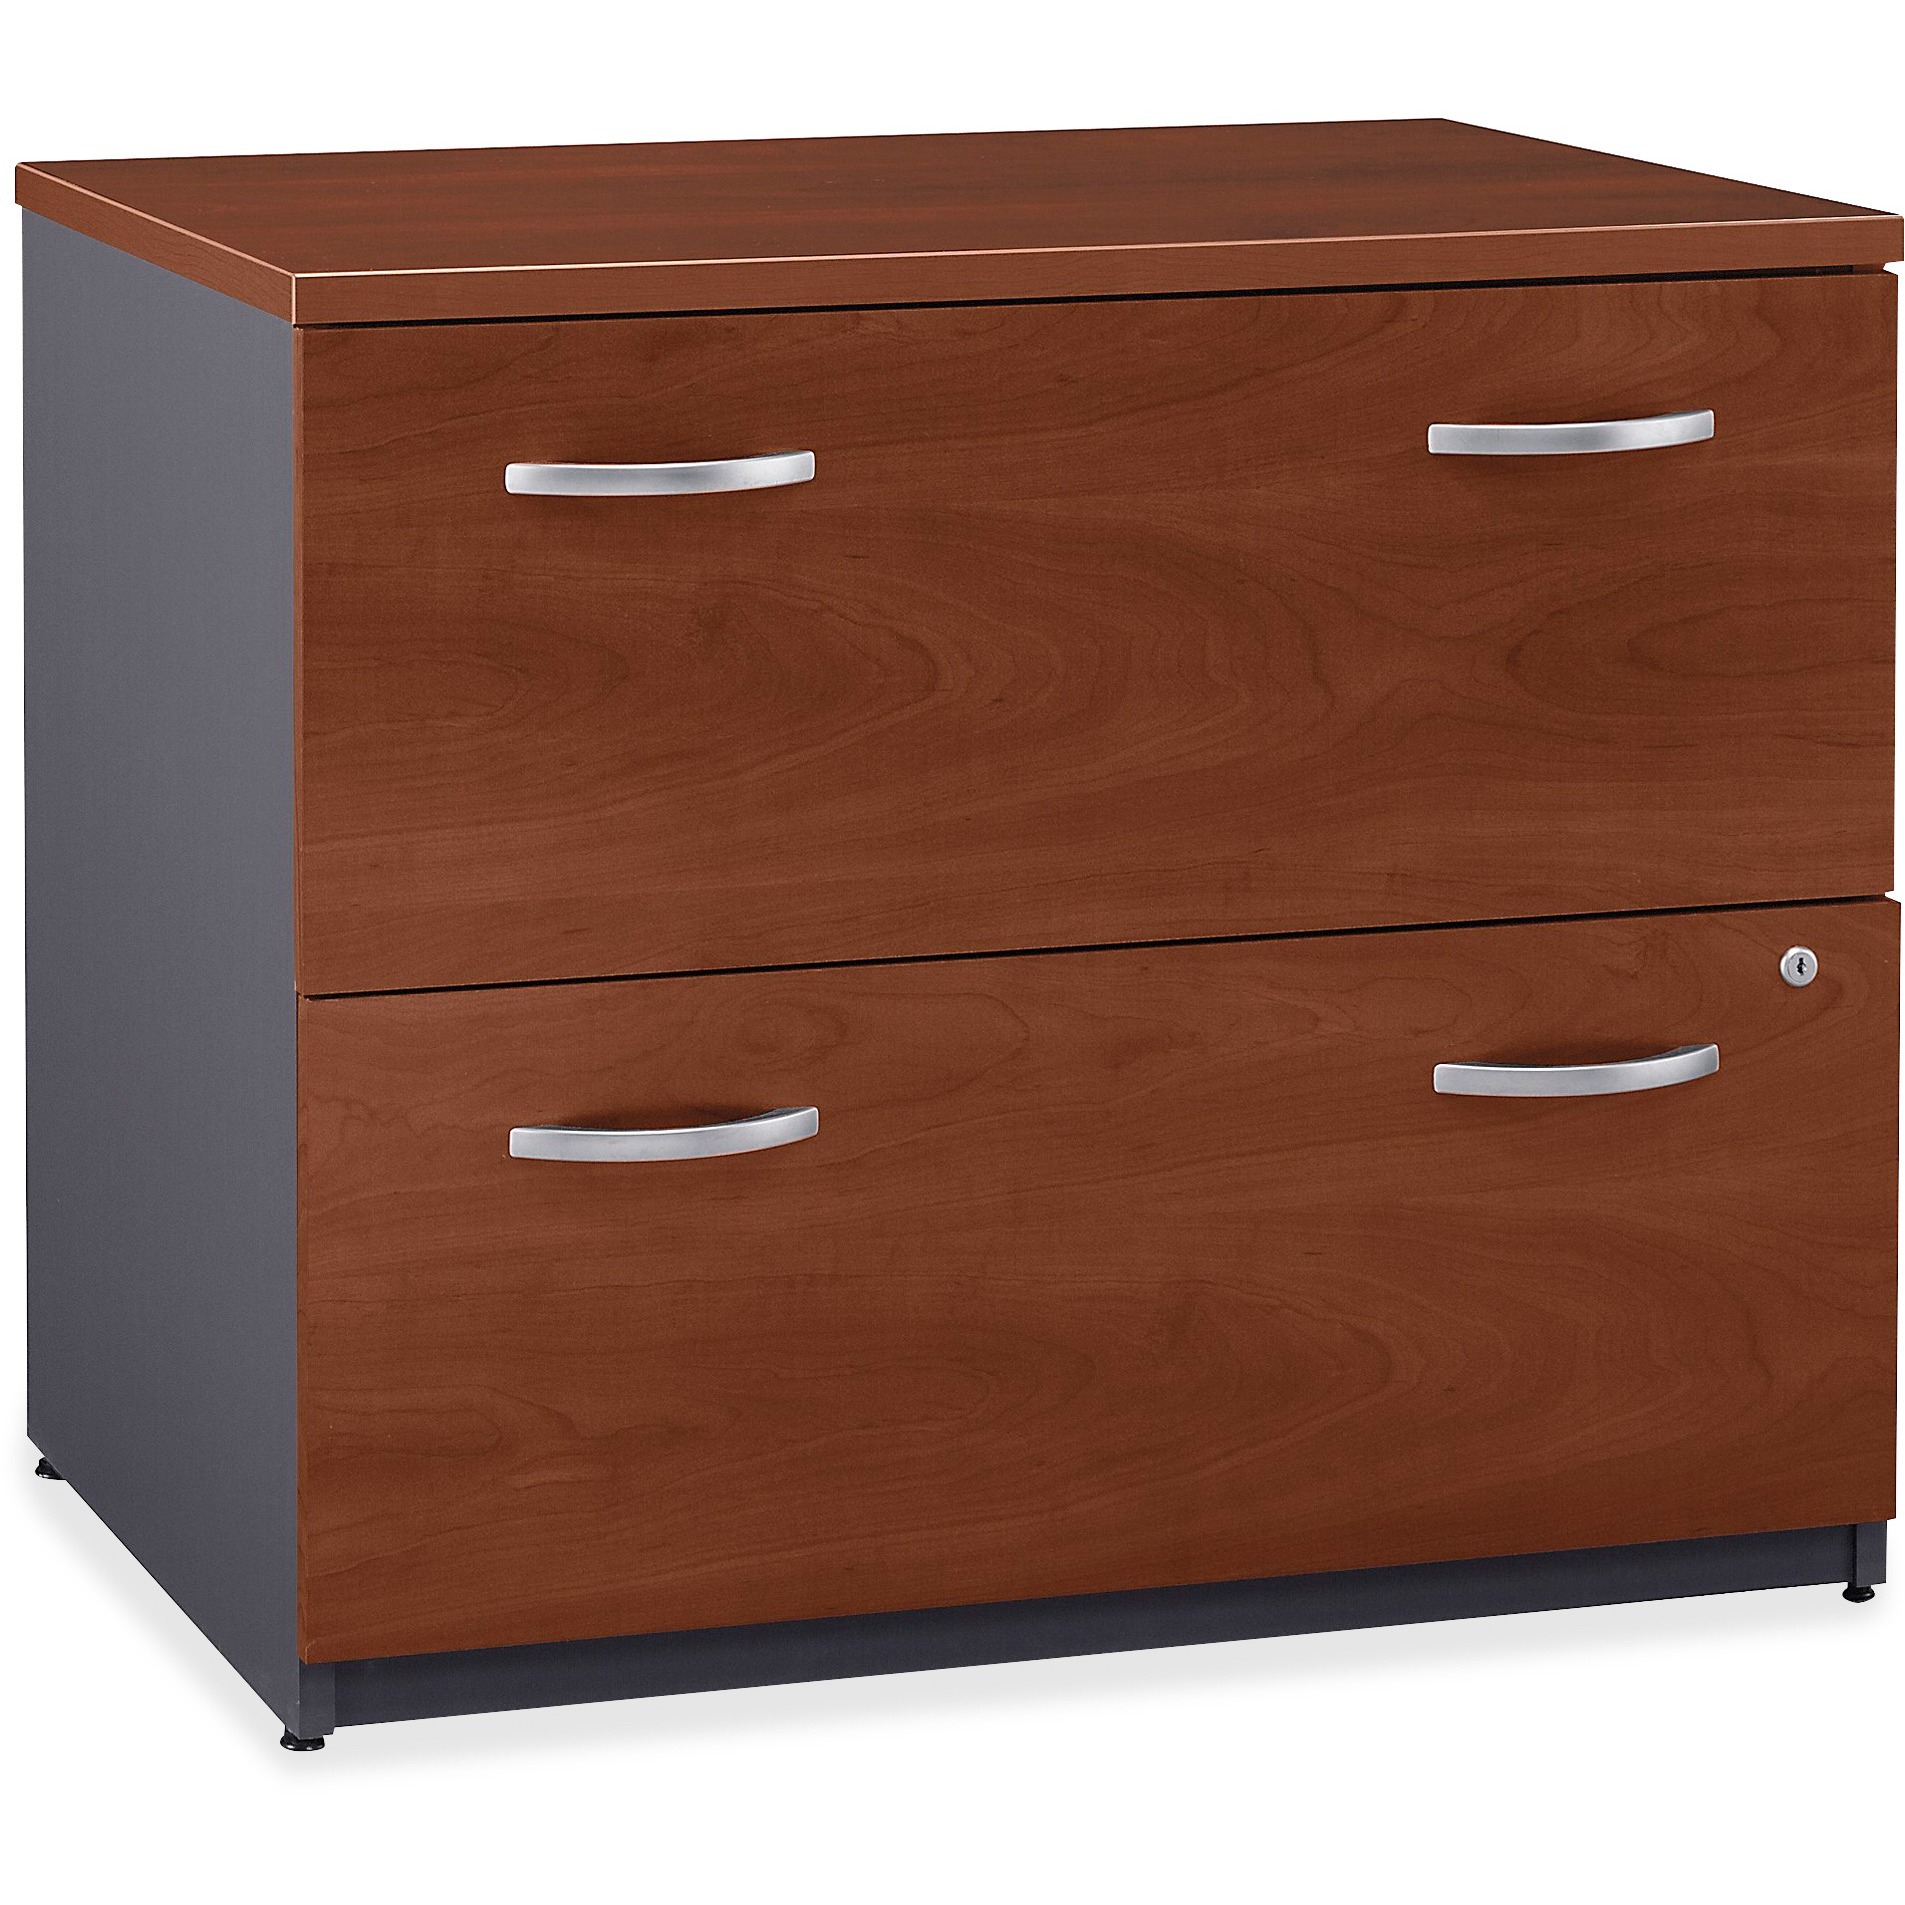 Series C 2 Drawer Lockable Lateral Filing Cabinet, Cherry - image 1 of 4